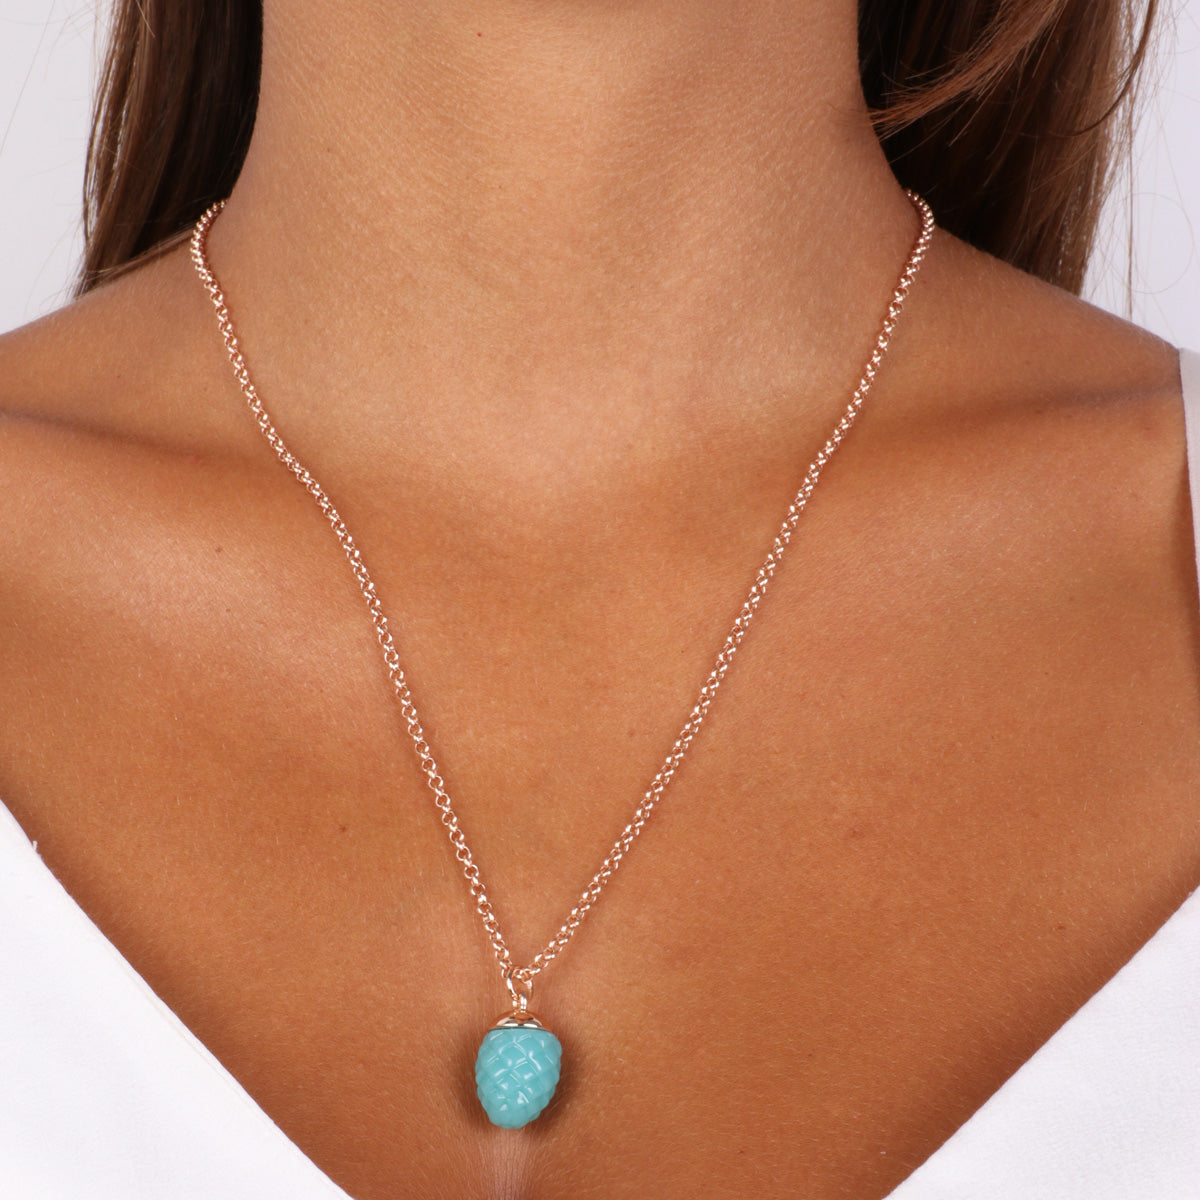 Metal necklace with turquoise enamel charming pine -shaped pendant